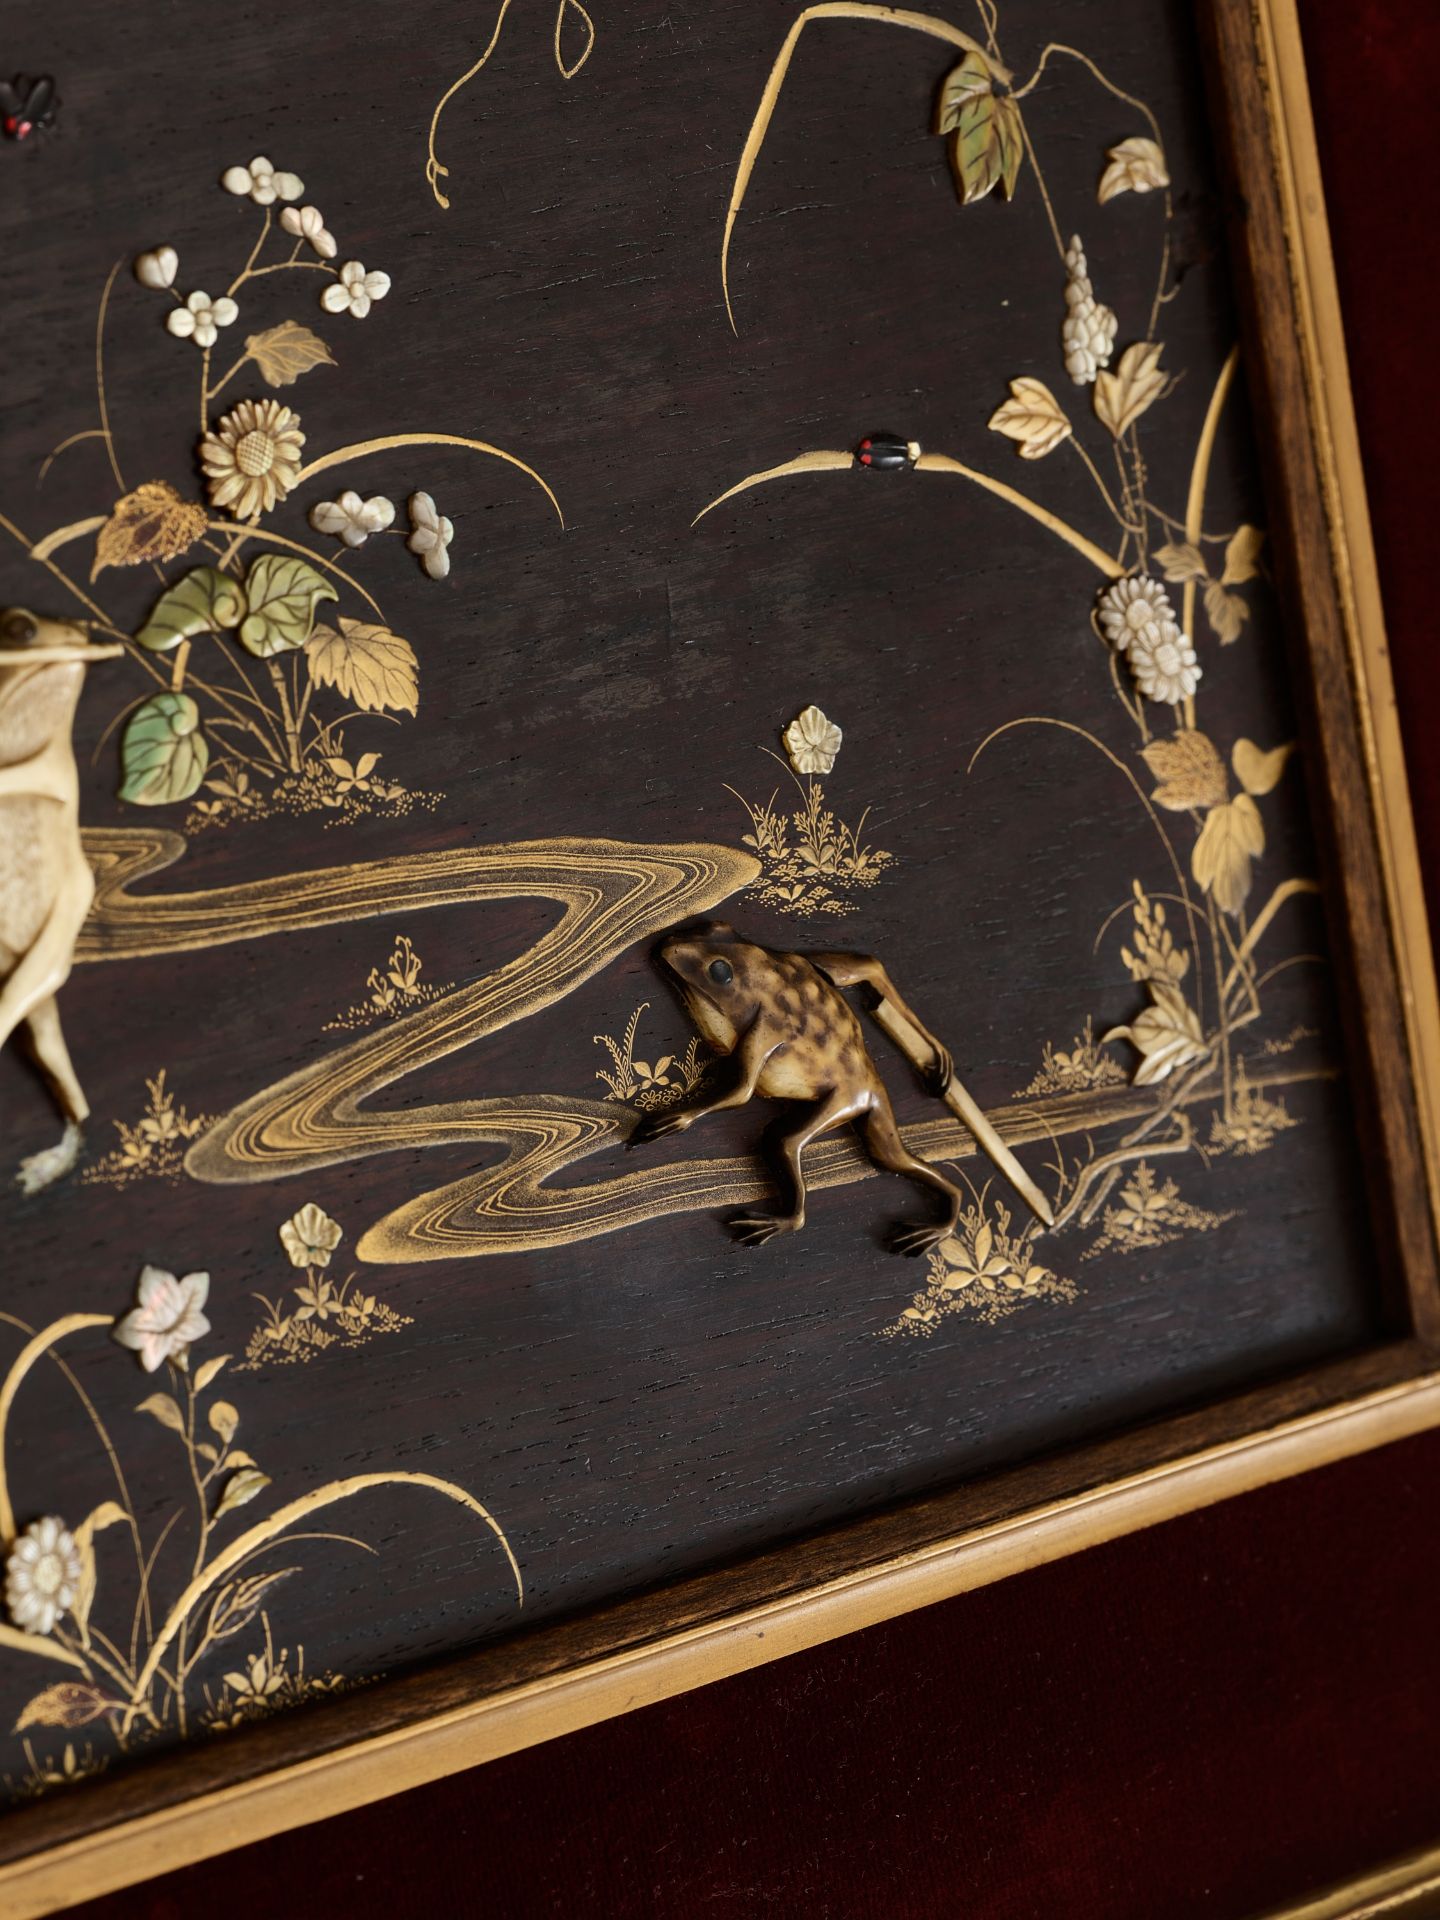 A SHIBAYAMA INLAID AND LACQUERED WOOD PANEL DEPICTING ANTHROPOMORPHIC FROGS - Image 2 of 7